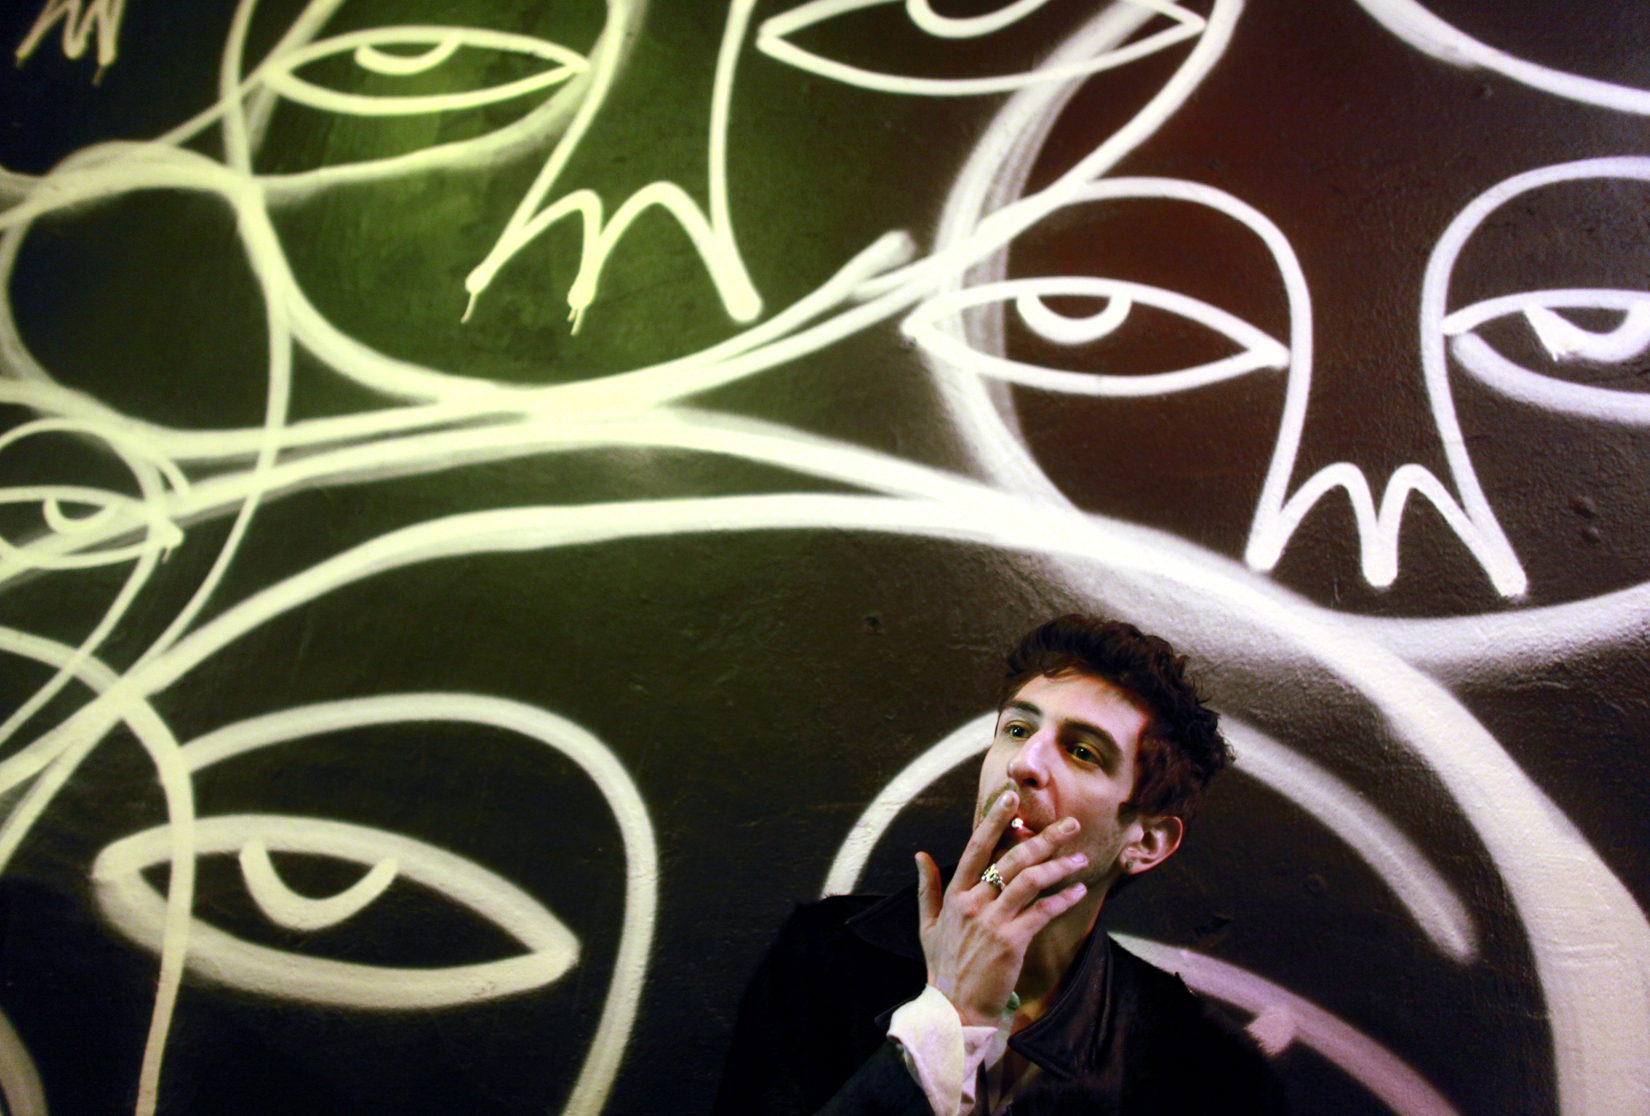 Designer Dominic Louis smokes a cigarette outside of a party at The Electric Room at the Dream Downtown hotel in Manhattan, NY, on February 14, 2013, the last day of New York Fashion Week. (For The New York Times)